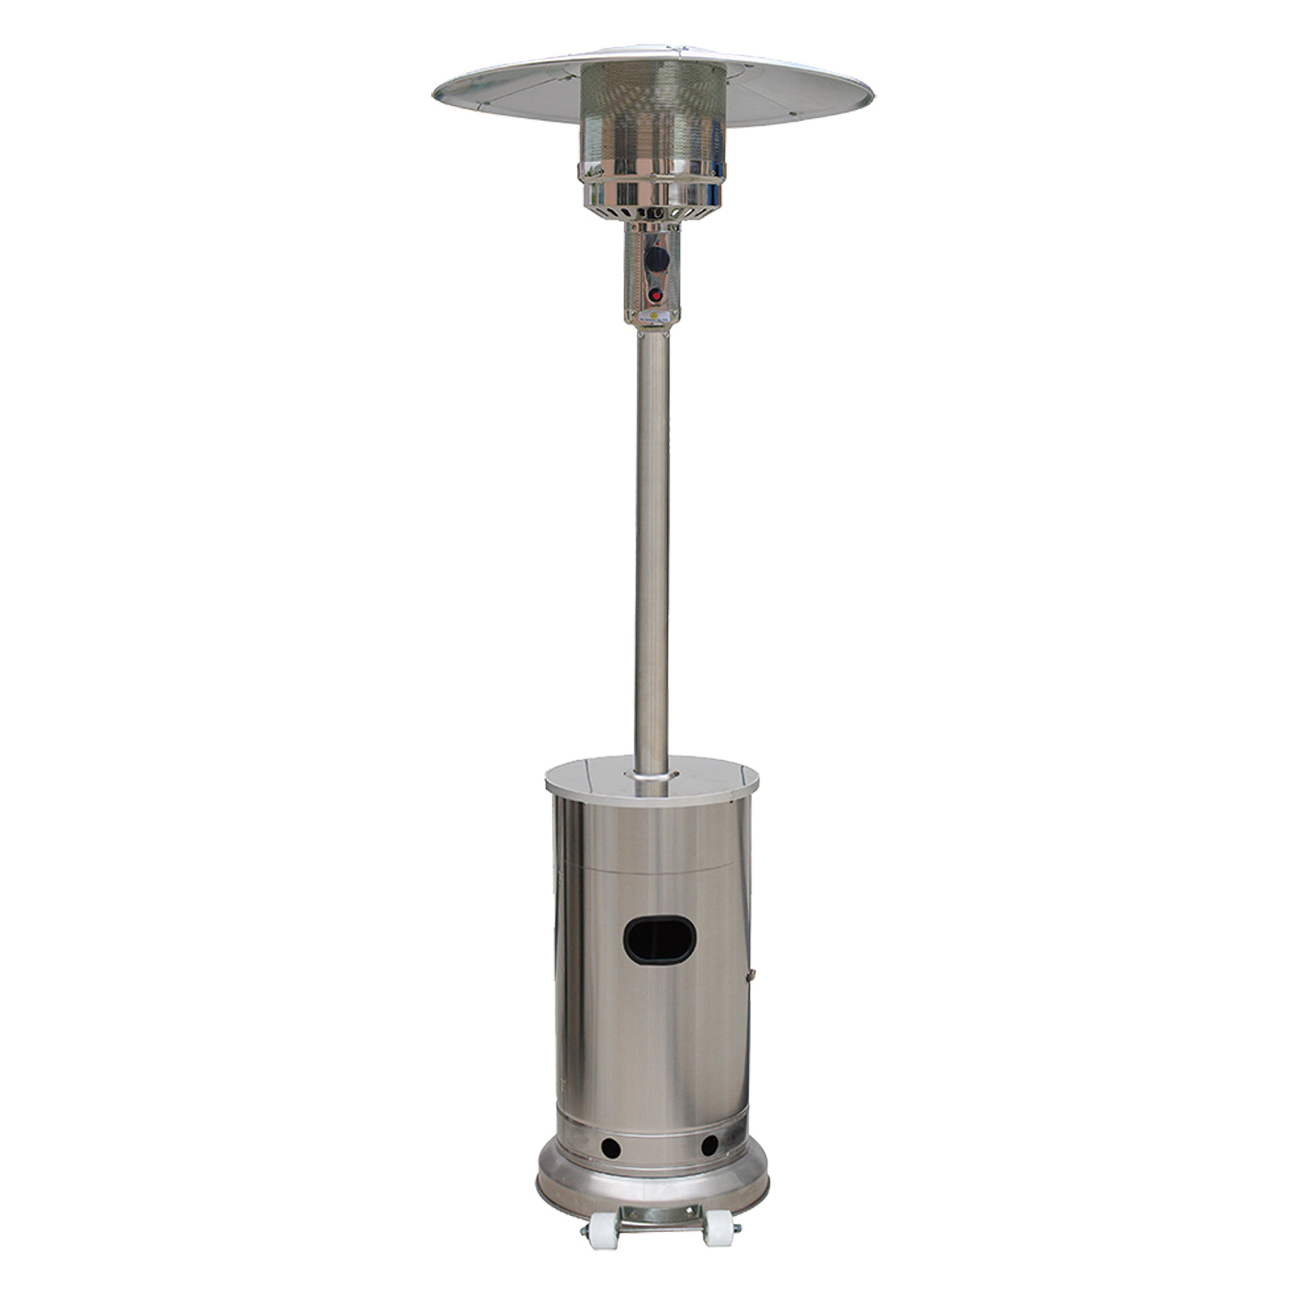 HSS-A-DSS-1 Patio Heater, Propane or Butane Gas Only, Electric Ignition, 41,000 Btu, 20 lb Tank